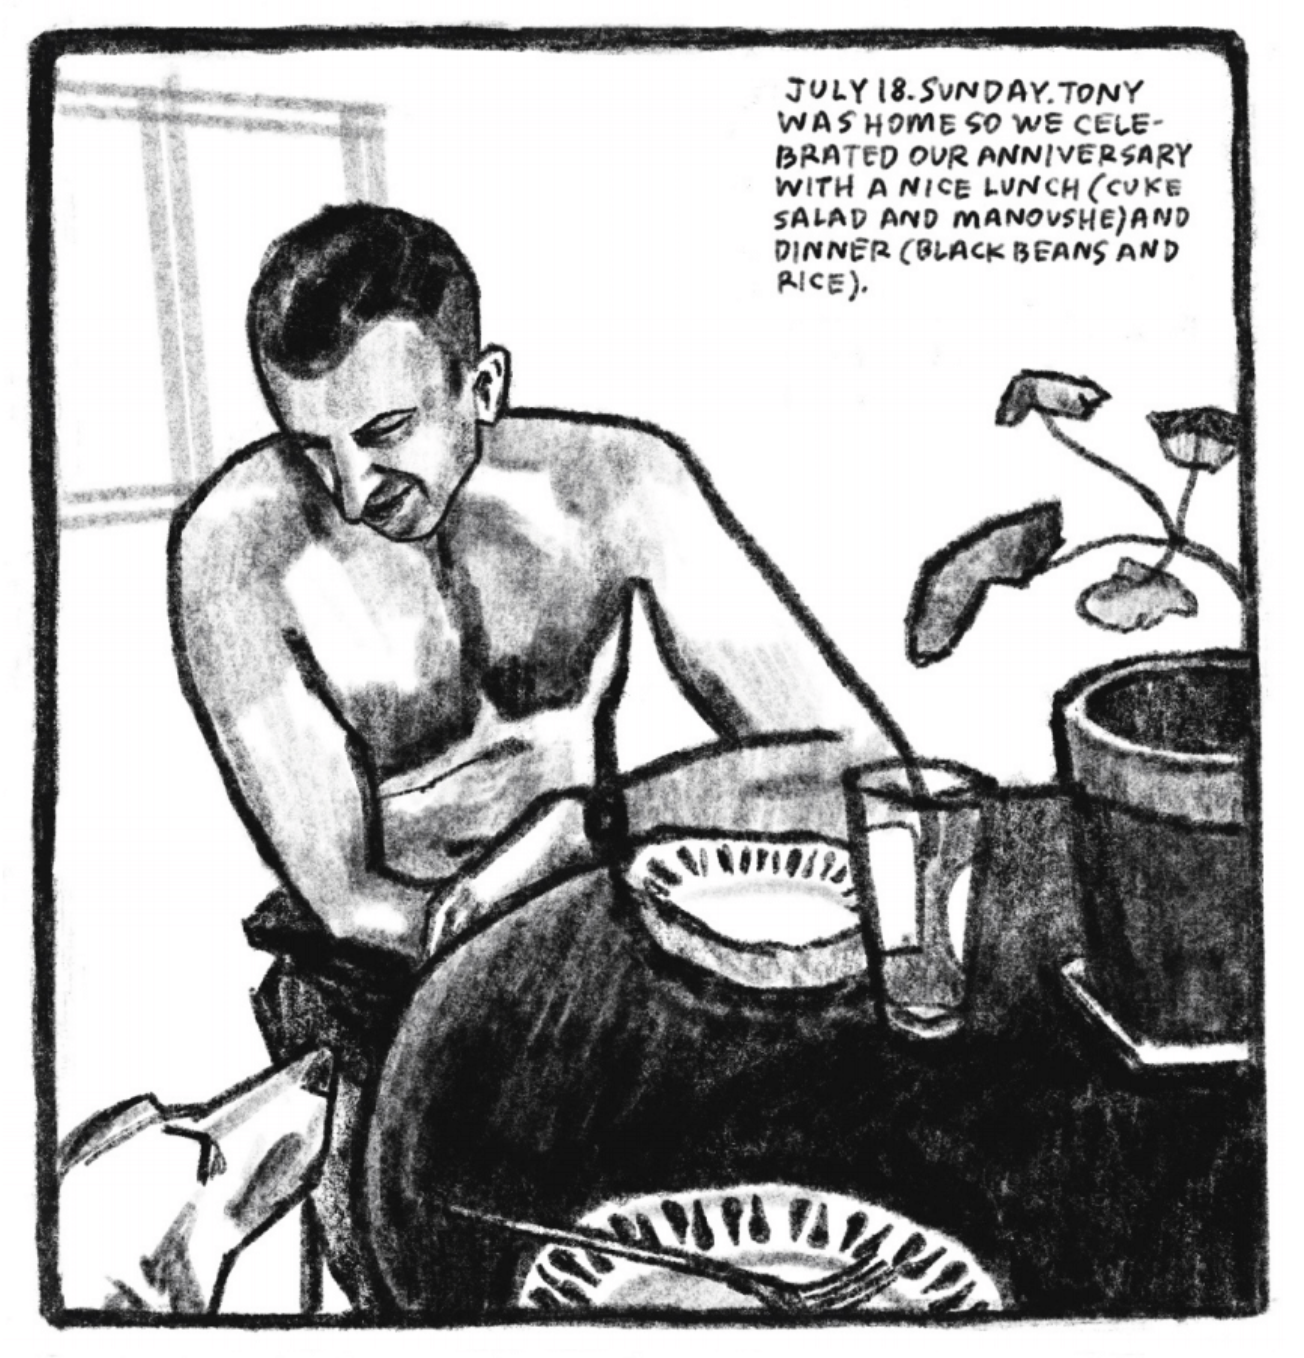 5. Tony sits at a table, resting his forearm on the table next to an empty shallow bowl whose brim is painted with tear-drop-like stripes. He is looking down and smiling at one of his dogs, who looks up at the table, possibly begging for food. There is a plate with the same design on the table in the foreground, empty with a fork resting on it. There is an empty glass next to Tonyâ€™s bowl and a potted plant as the centerpiece. â€œJuly 18. Sunday. Tony was home so we celebrated our anniversary with a nice lunch (cuke salad  and manoushe) and dinner (black beans and rice).â€